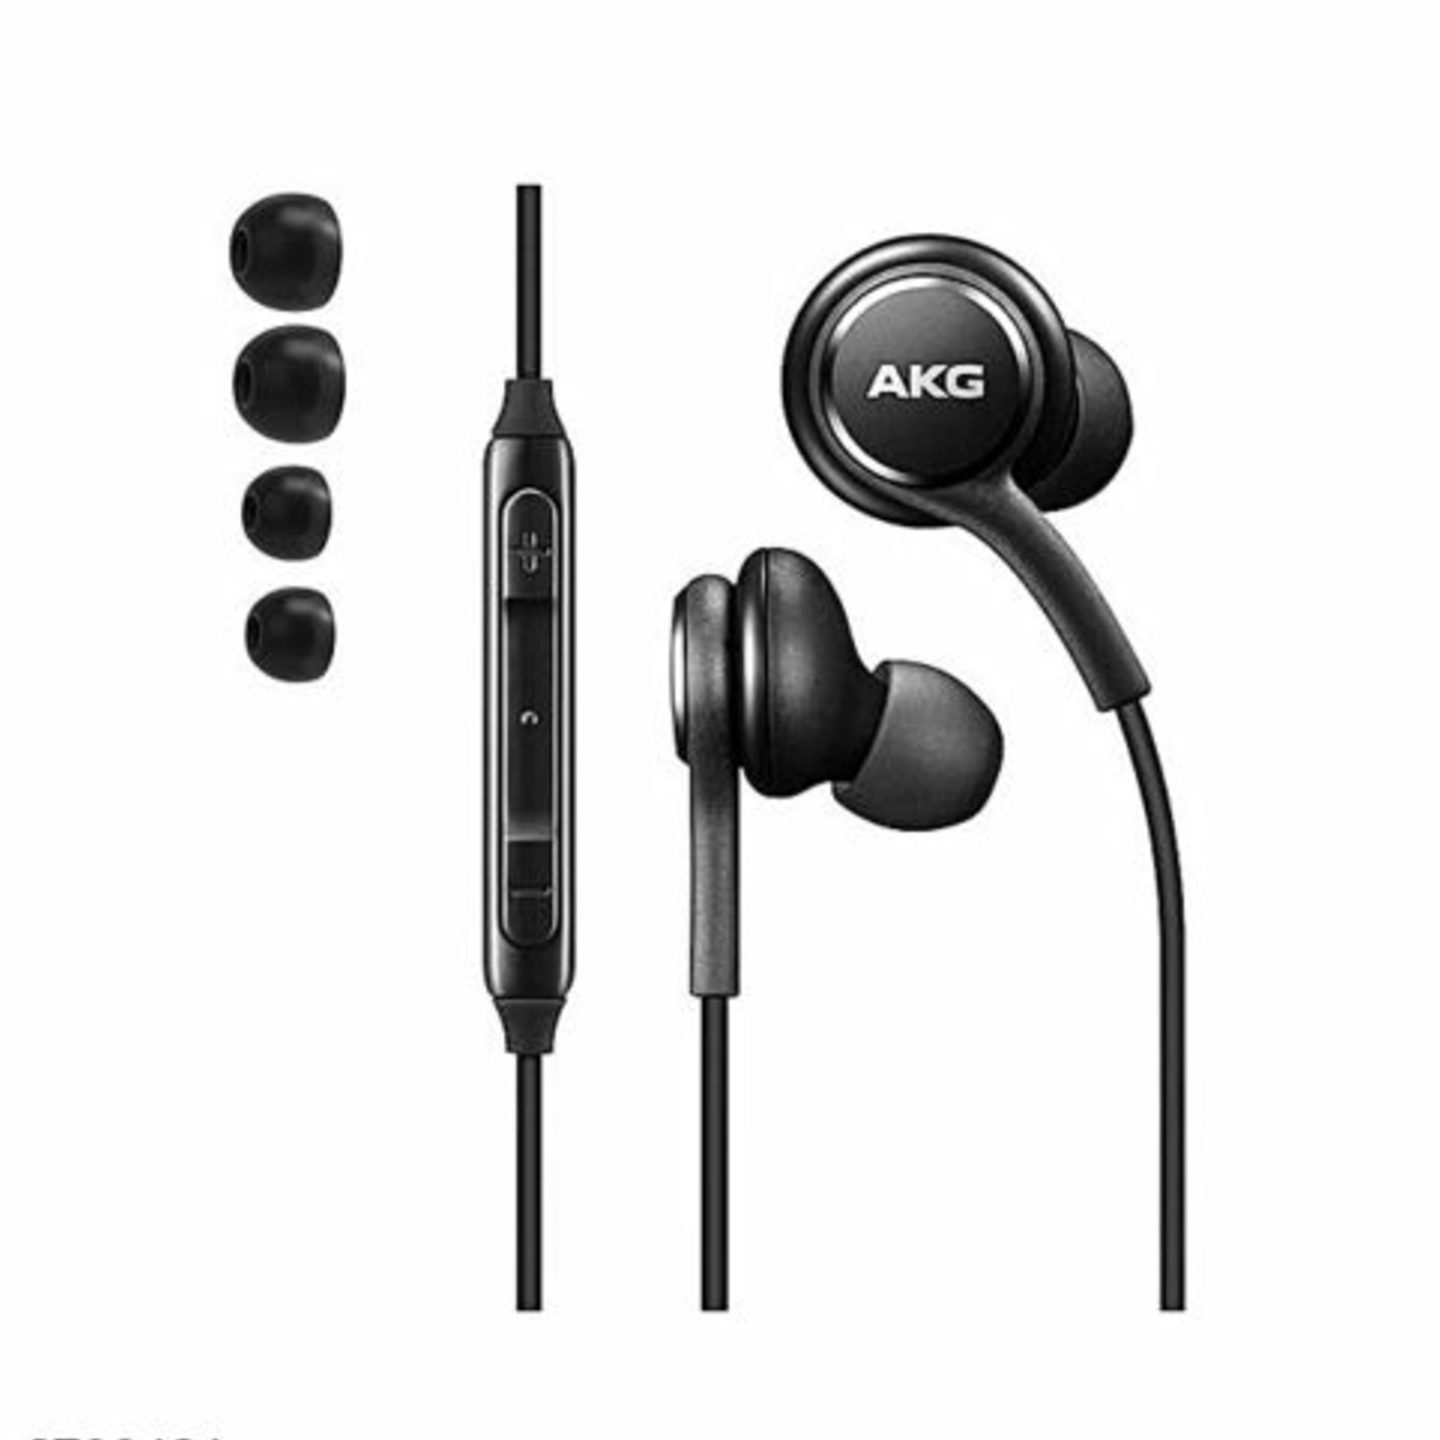 Basic Wired Earphones With Mic